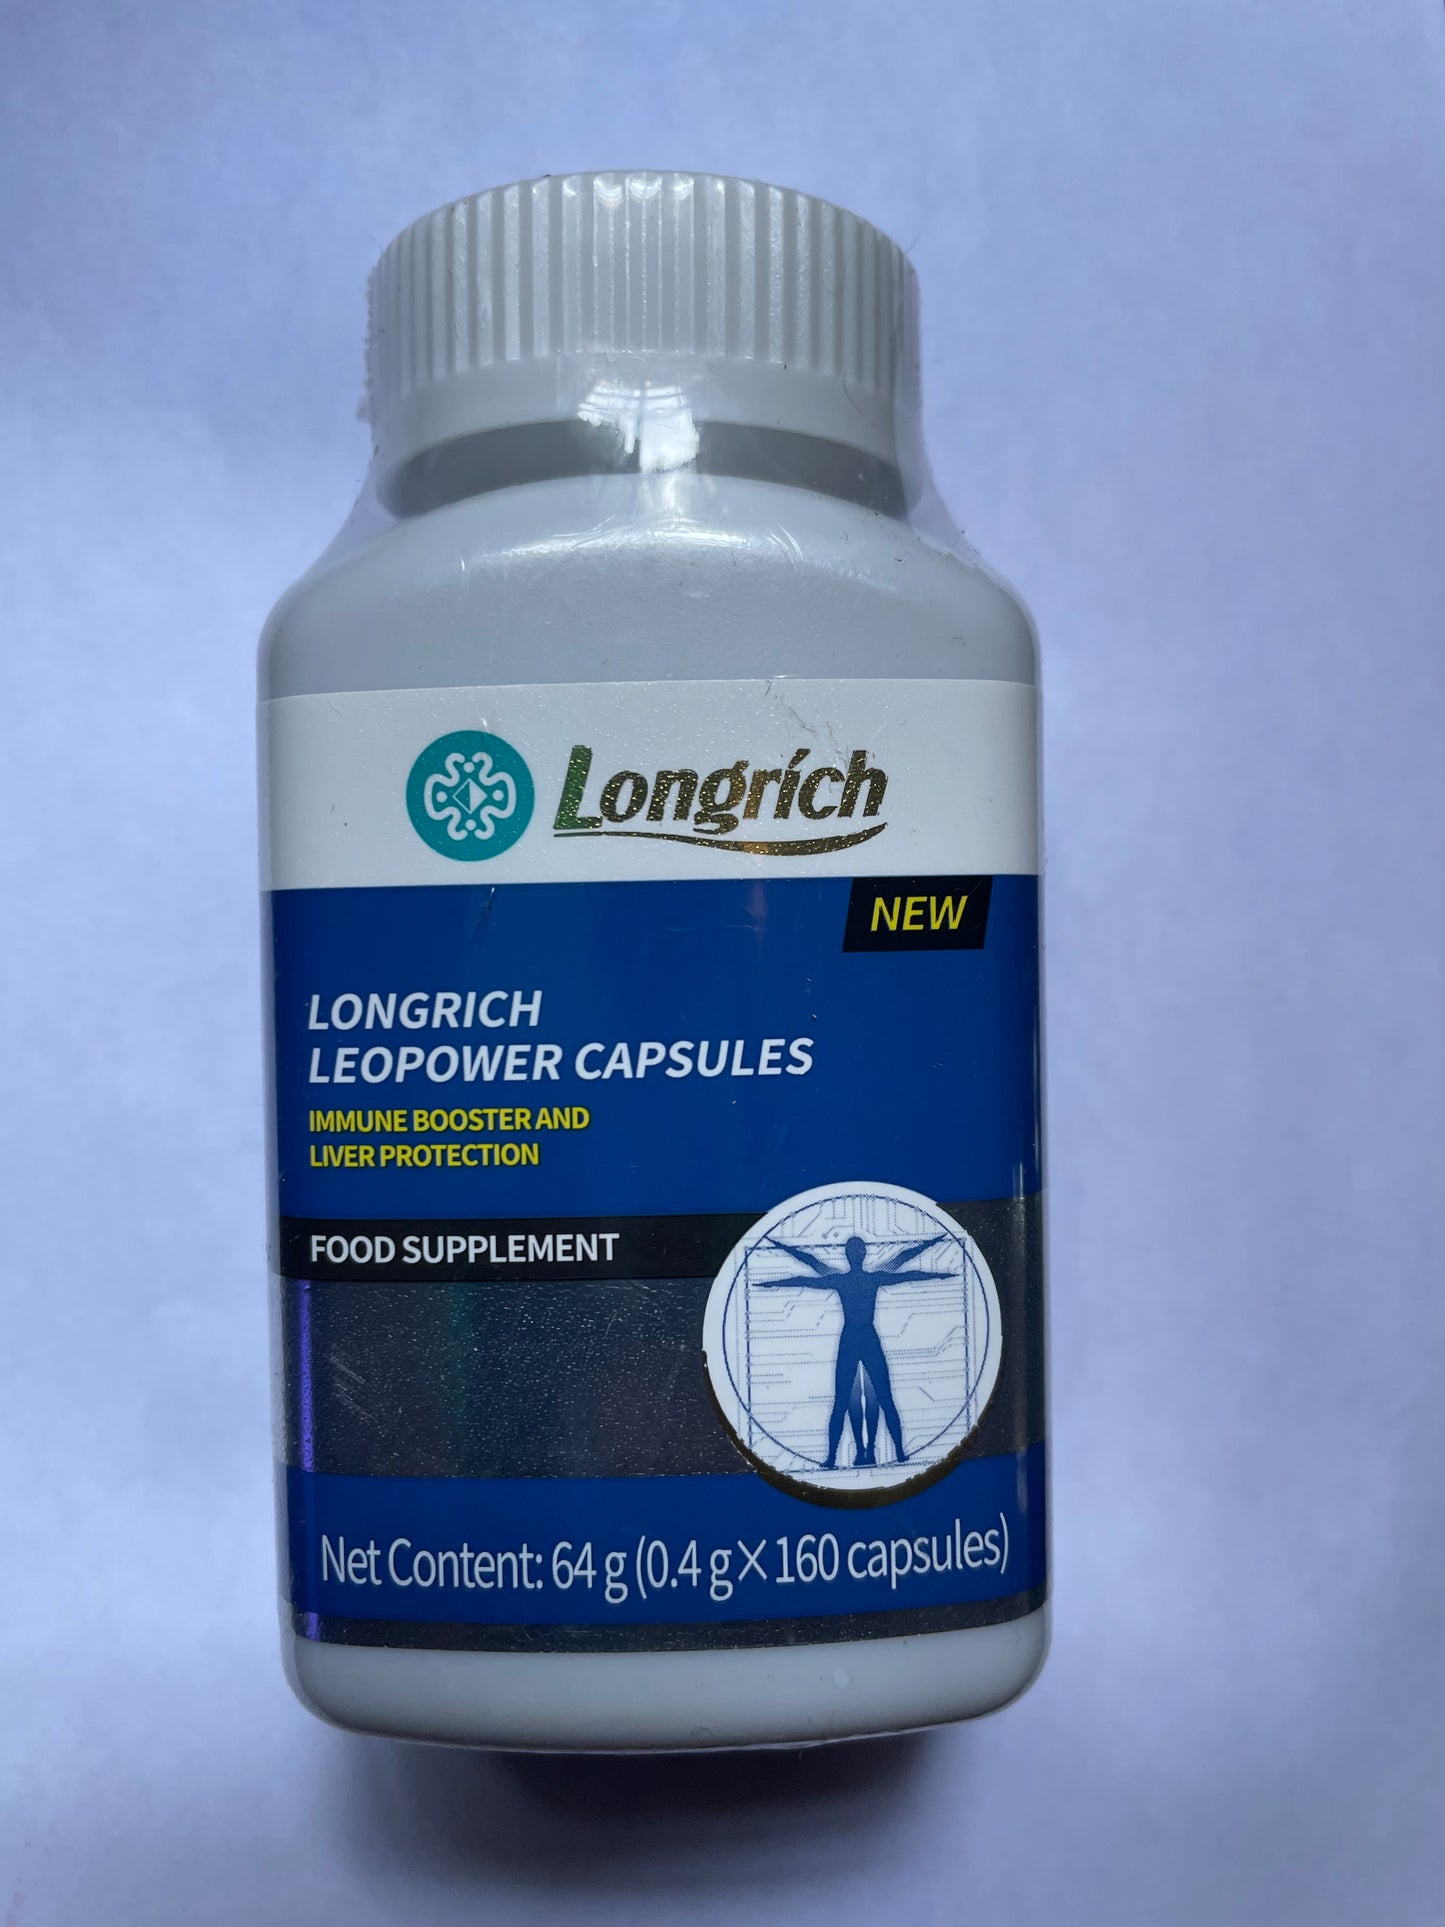 LONGRICH LIBAO DIETARY SUPPLEMENT FOR MEN/ LONGRICH LEOPOWER CAPSULES/ IMMUNE BOOSTER AND LIVER PROTECTION